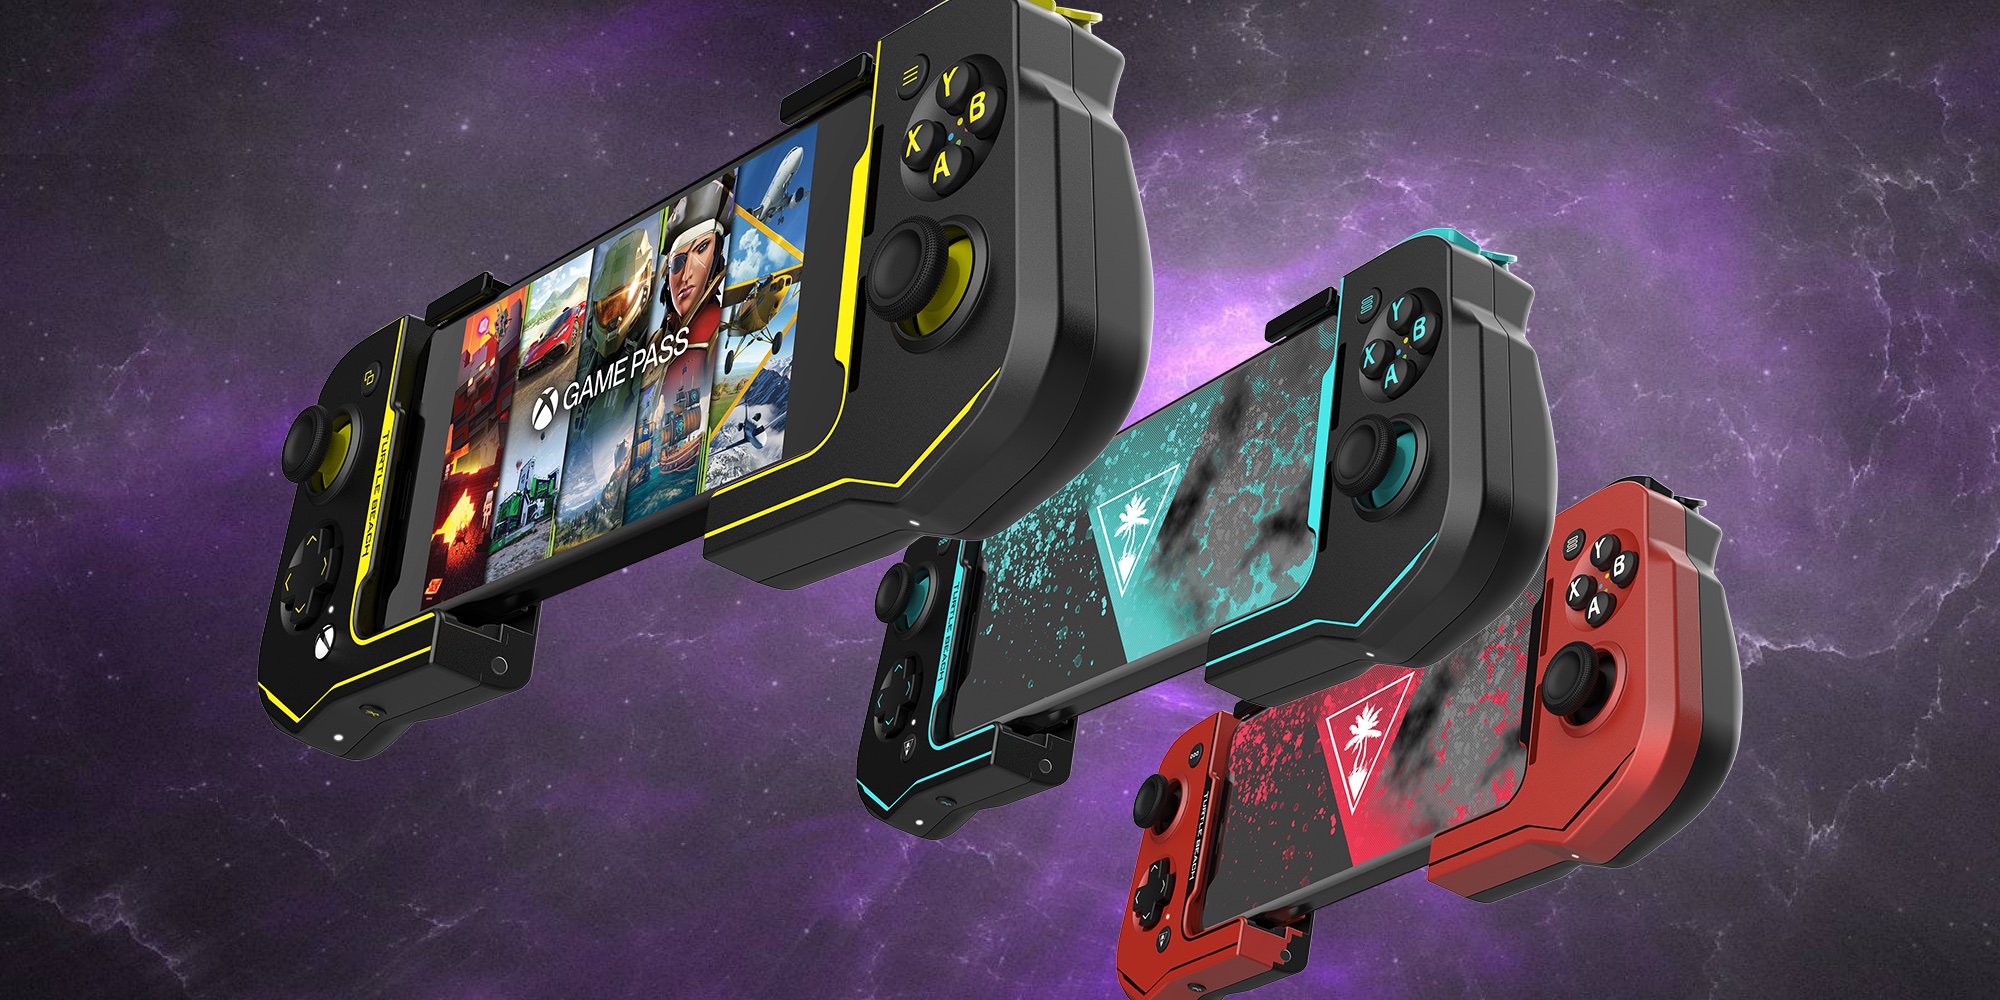 ambition Pursuit frozen Turtle Beach's Atom gamepad turns your Android smartphone into a Switch at  $75